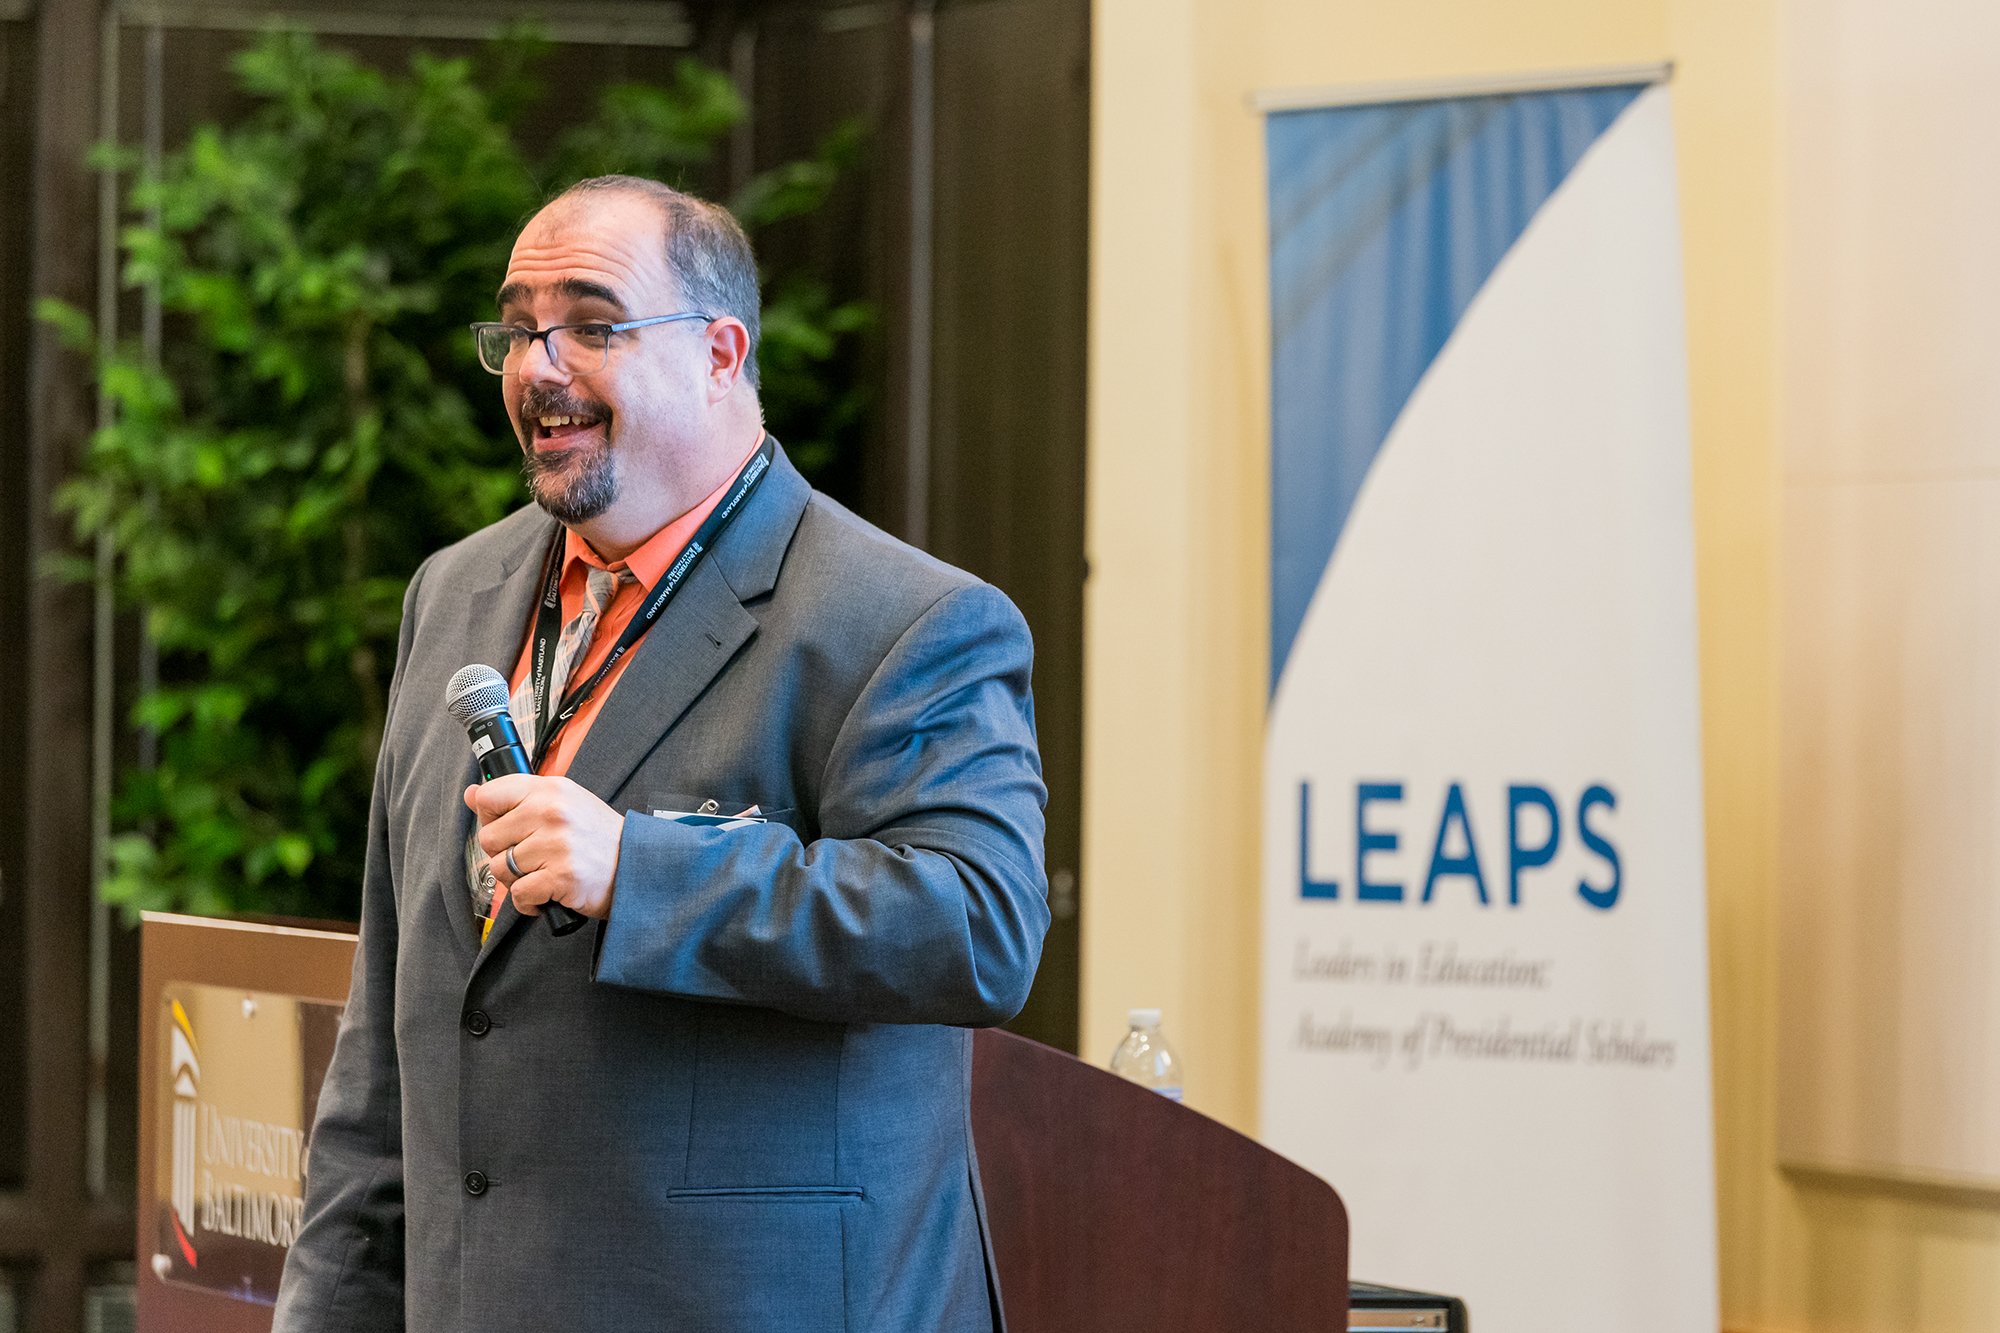 Sol Roberts-Lieb delivers his keynote presentation at LEAPS Symposium on April 2 at the SMC Campus Center.